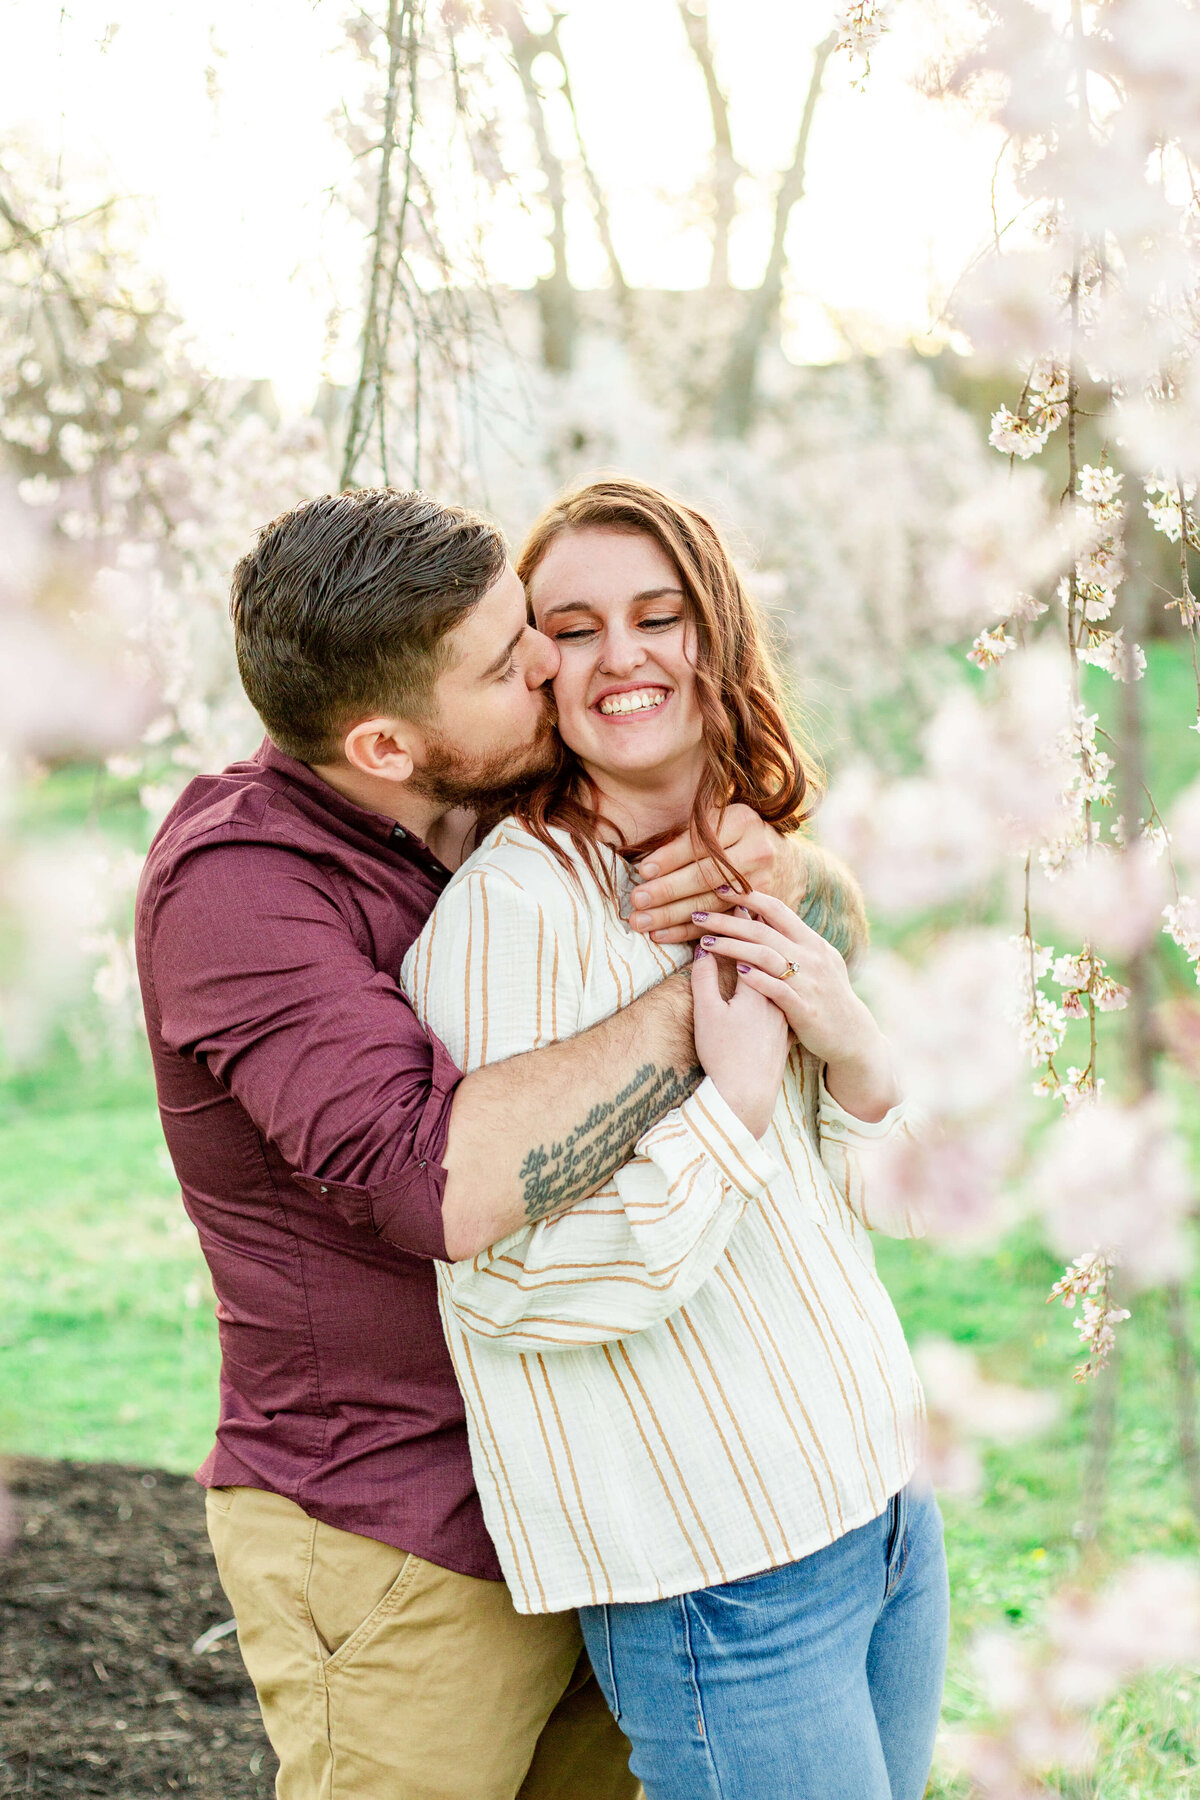 Light-bright-and-airy-engagement-photos-by-Bethany-Lane-Photography-1